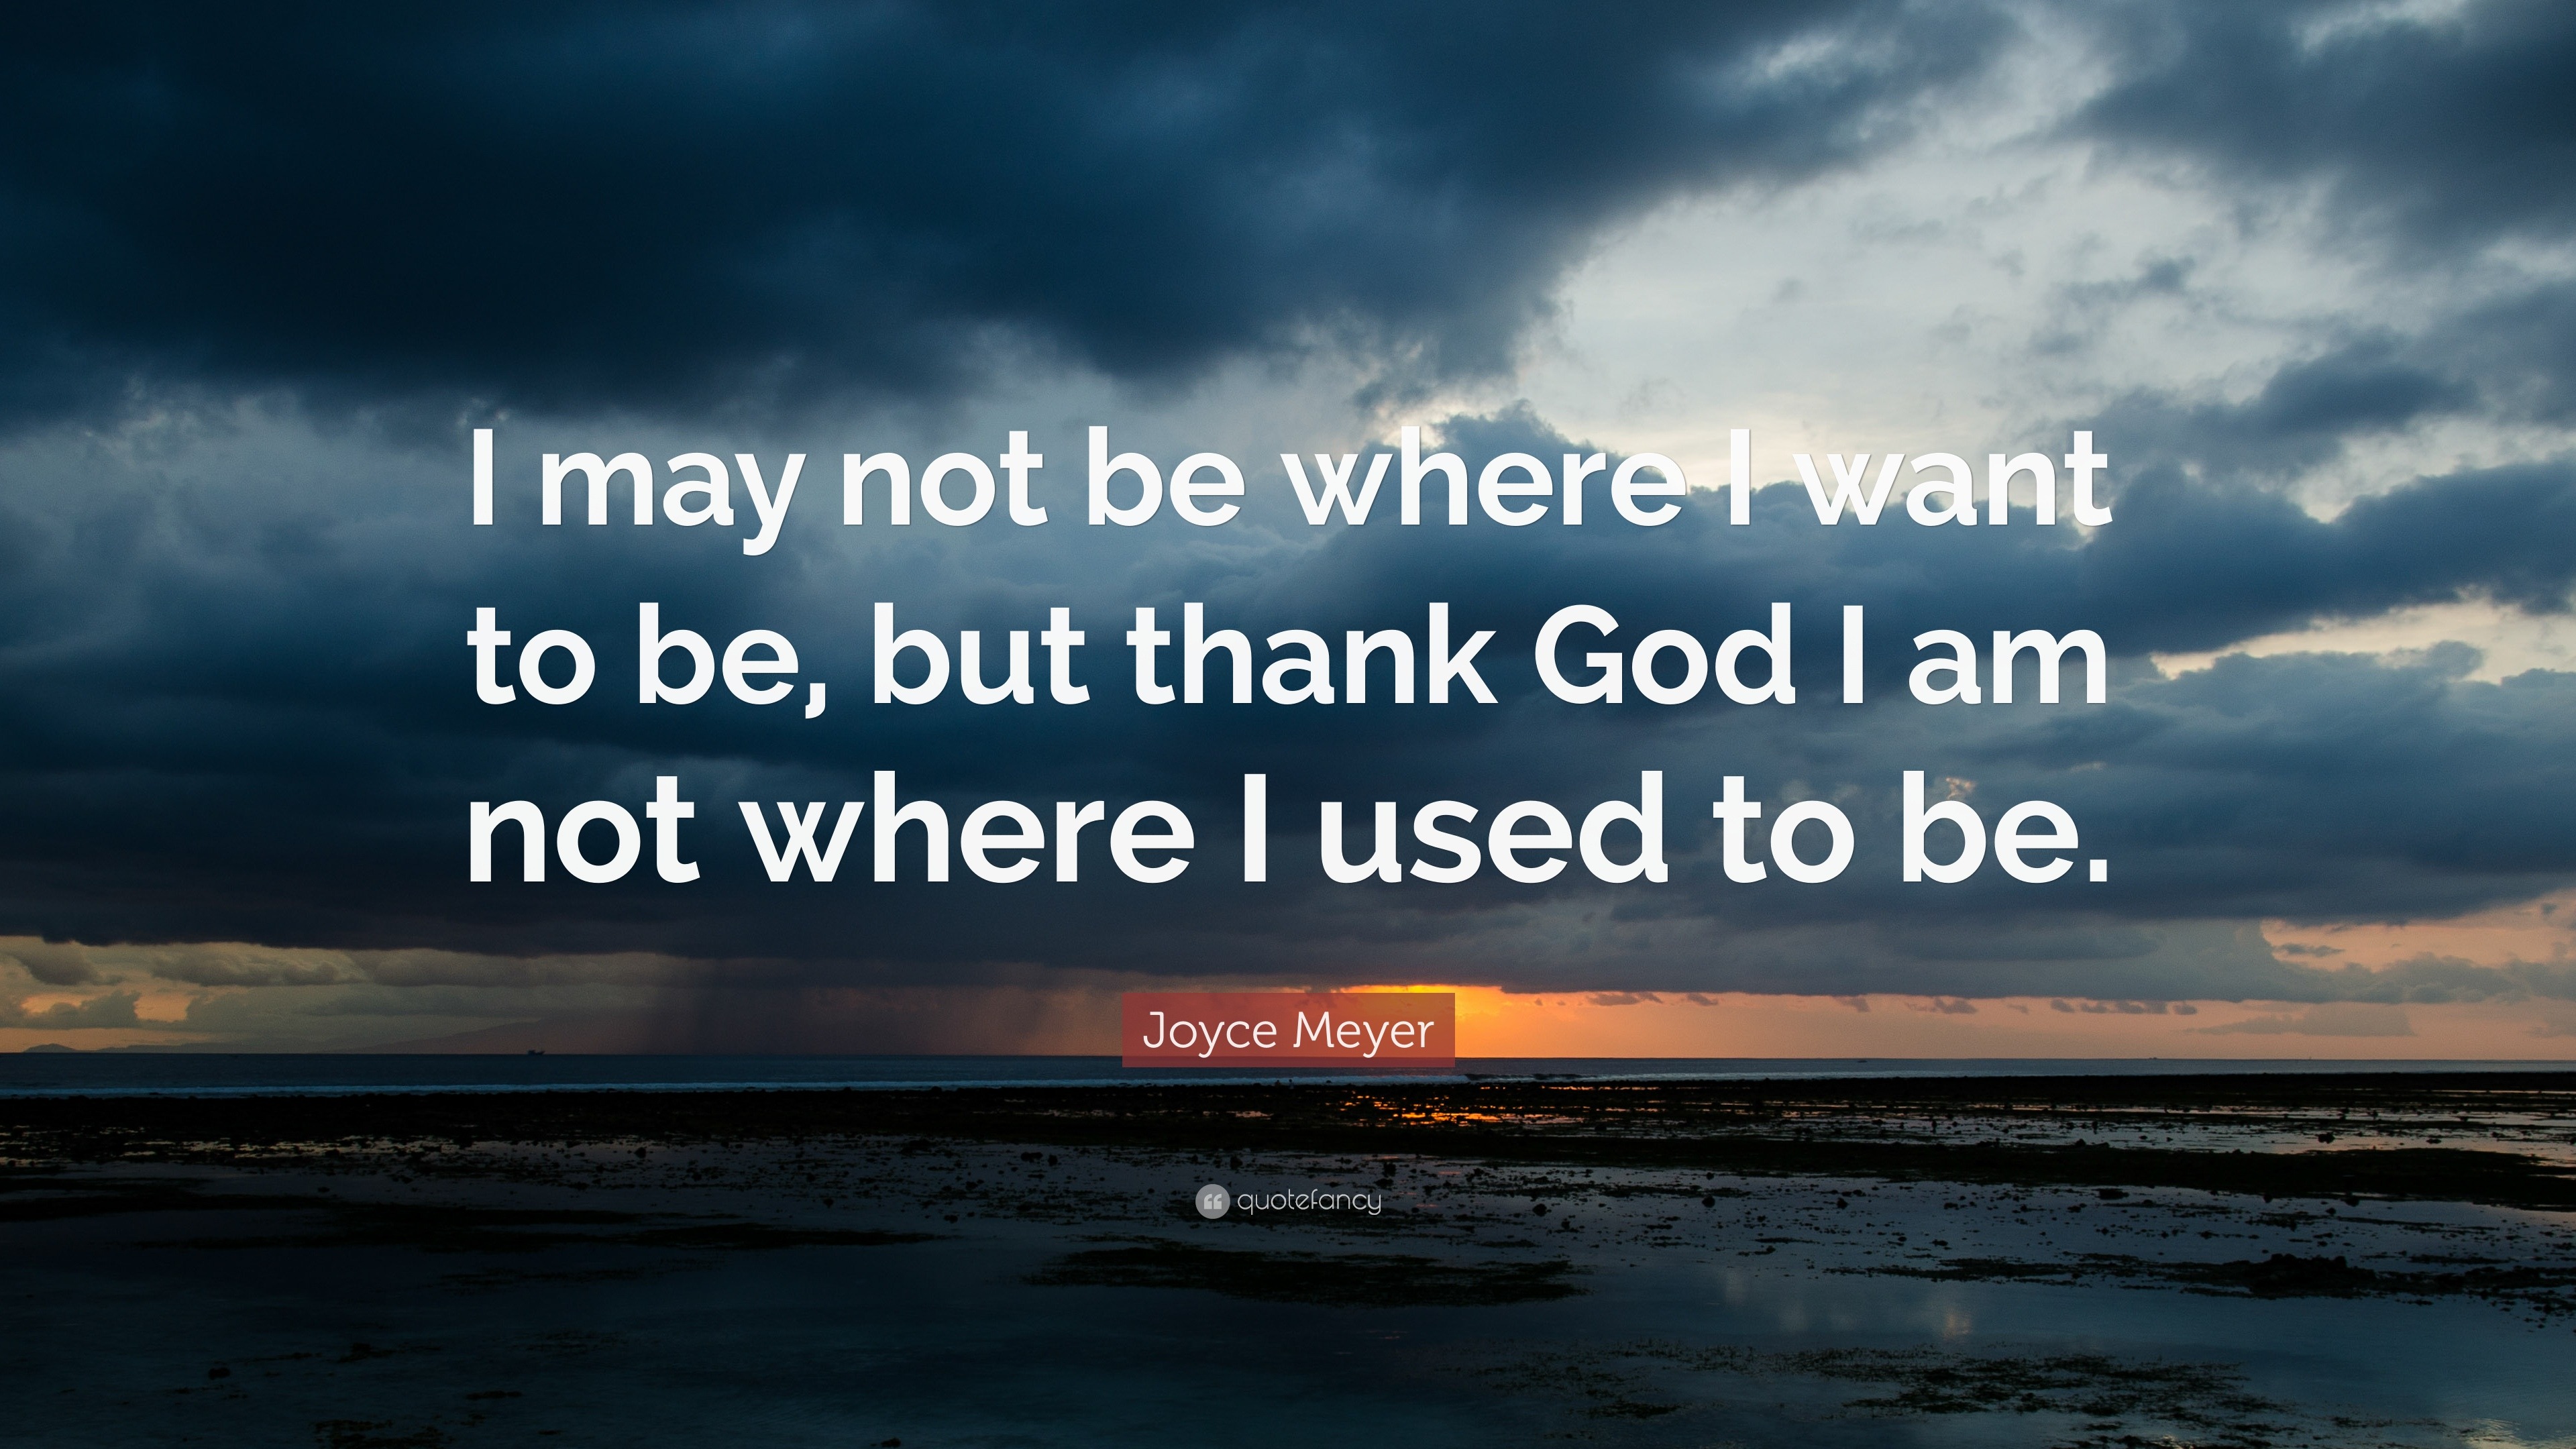 Joyce Meyer Quote: “I may not be where I want to be, but thank God I am